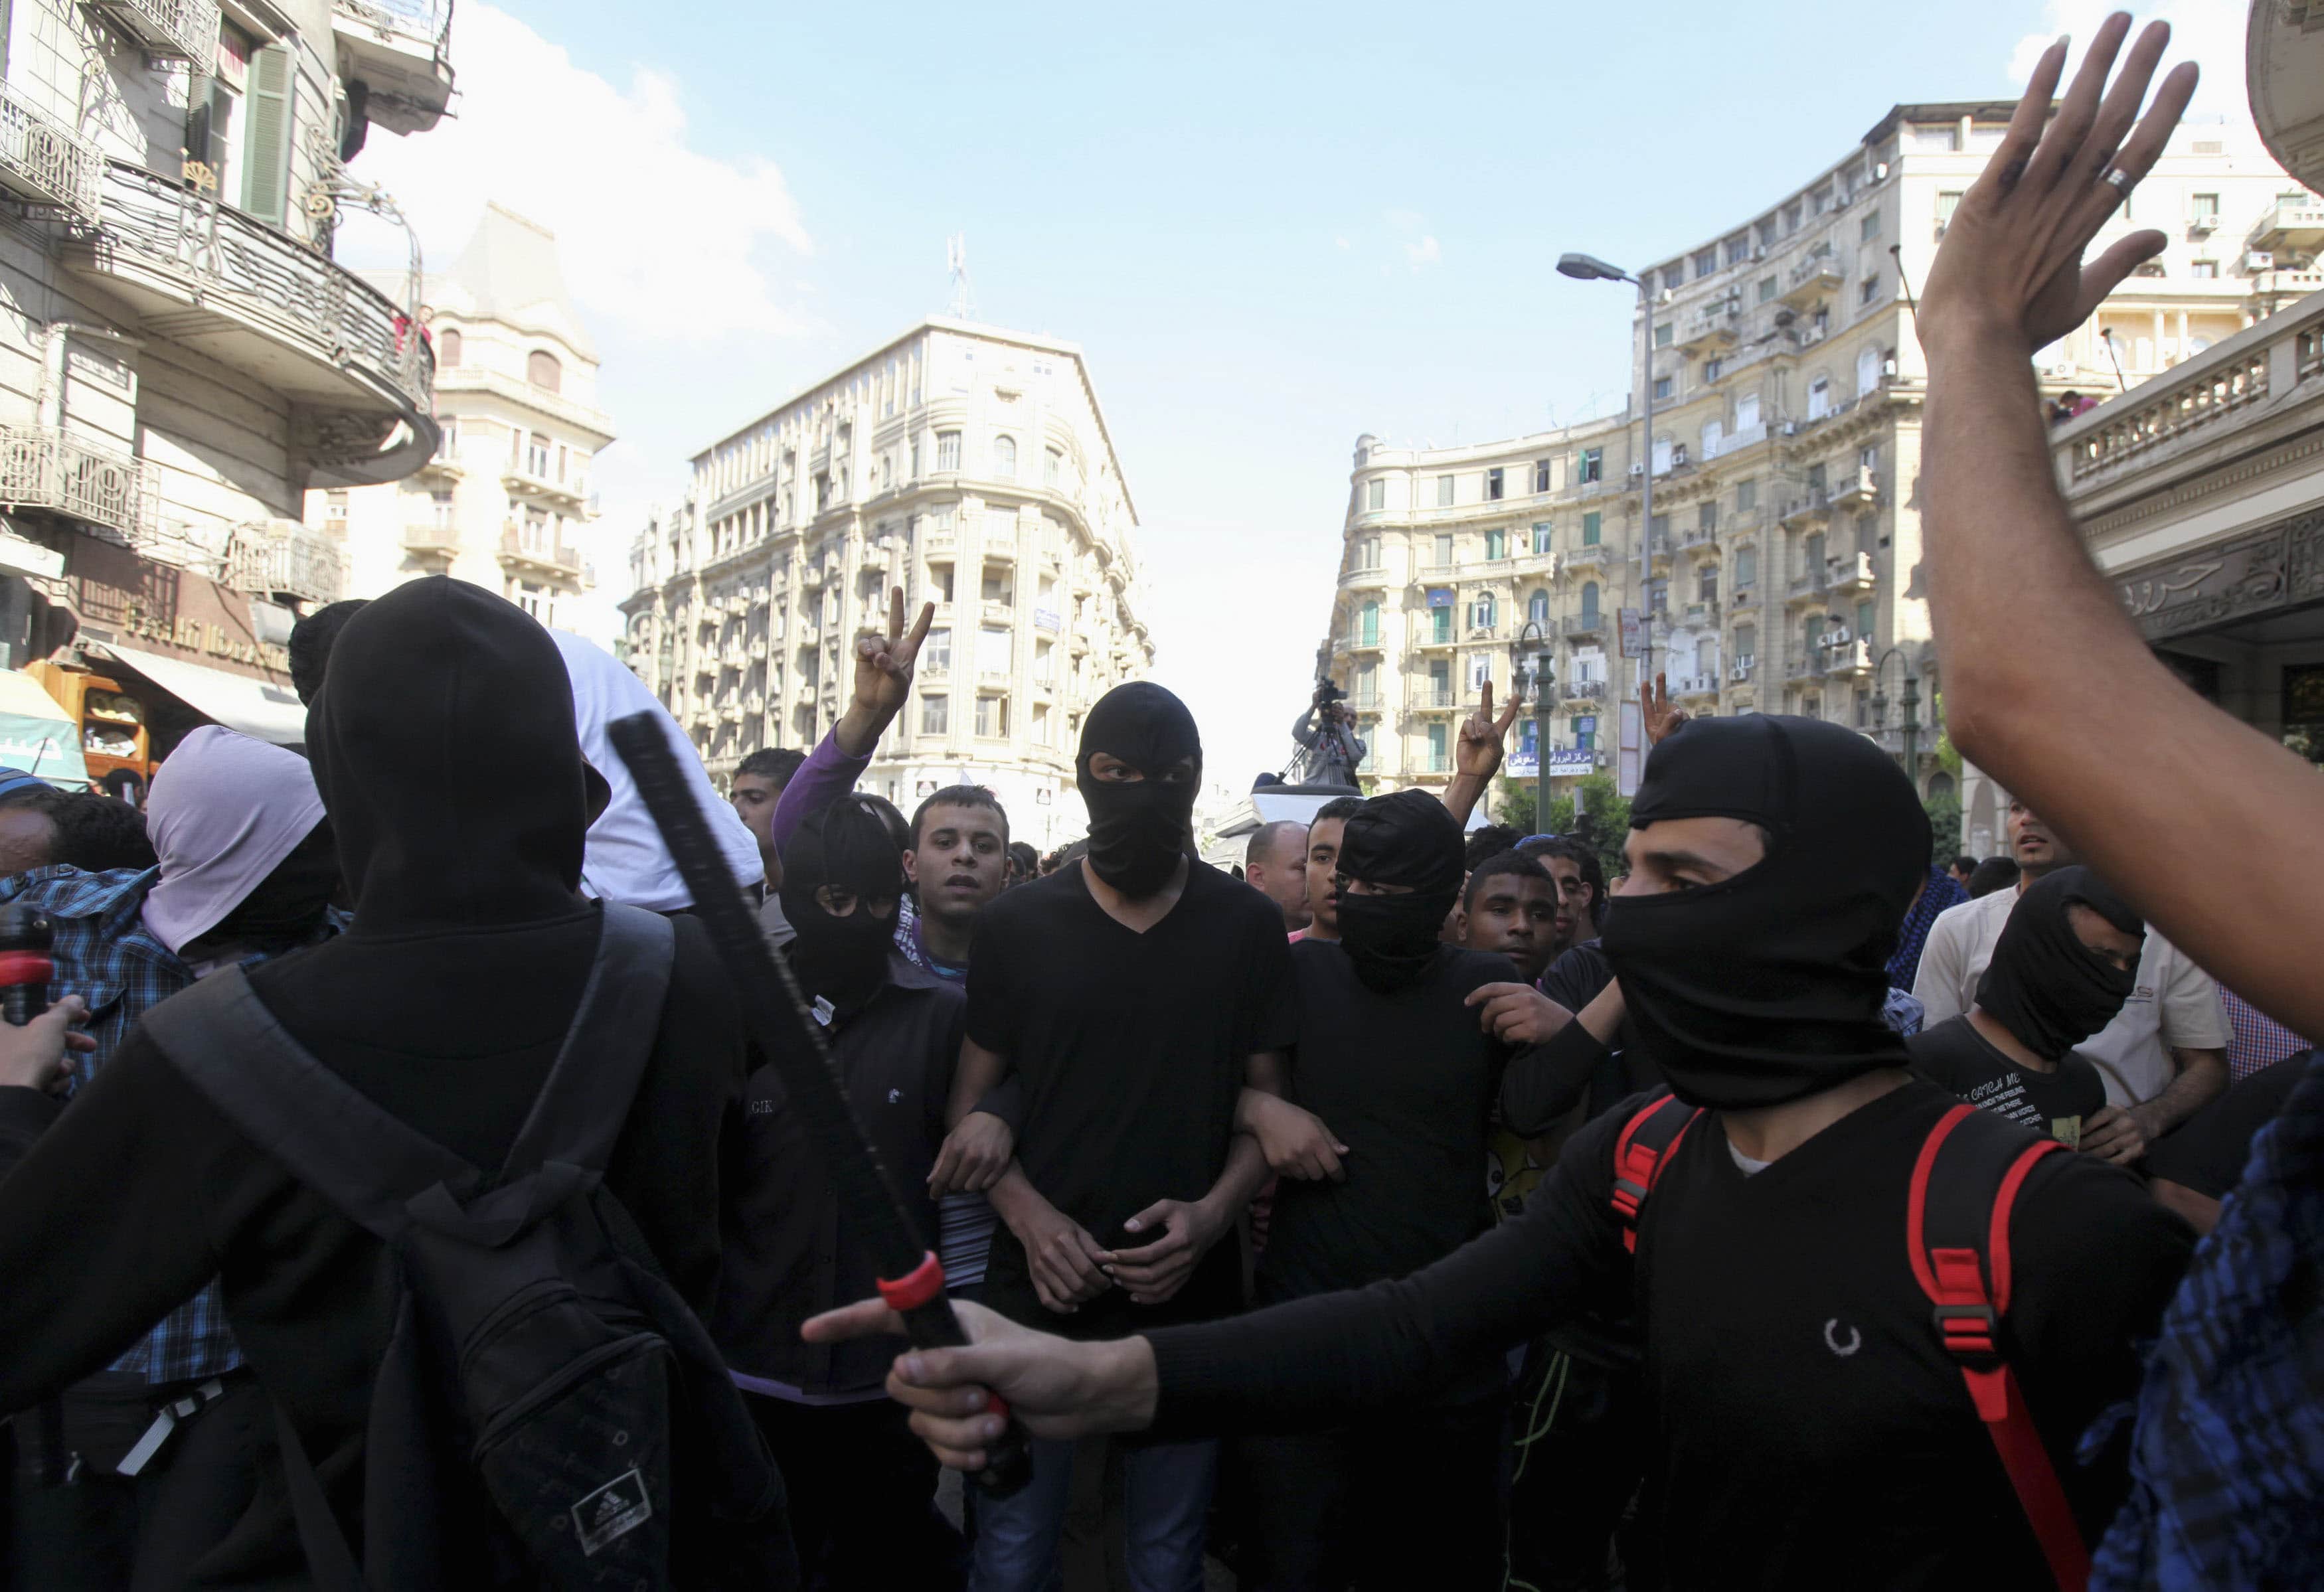 Protesters claiming to be members of the 'Black Bloc' prepare to clash with demonstrators loyal to the Muslim Brotherhood in an area near Tahrir Square on 19 April 2013, REUTERS/Mohamed Abd El Ghany